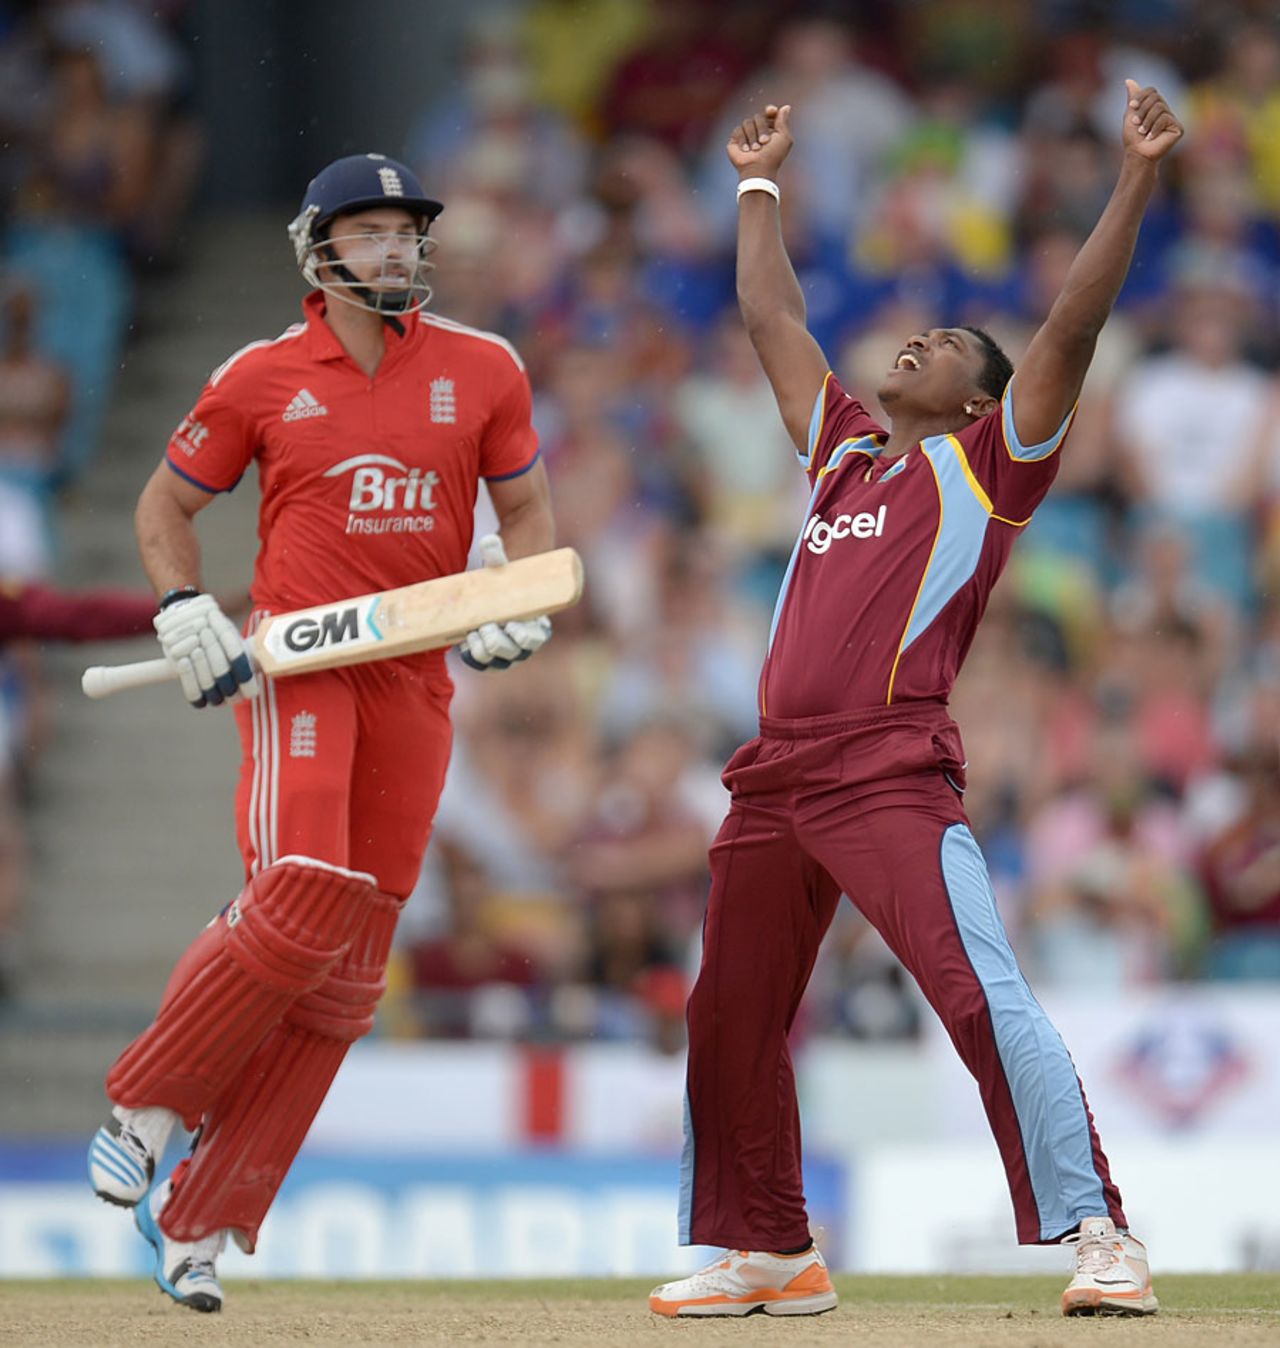 Krishmar Santokie made an impact on his return to the side, West Indies v England, 2nd T20, Barbados, March 11, 2014